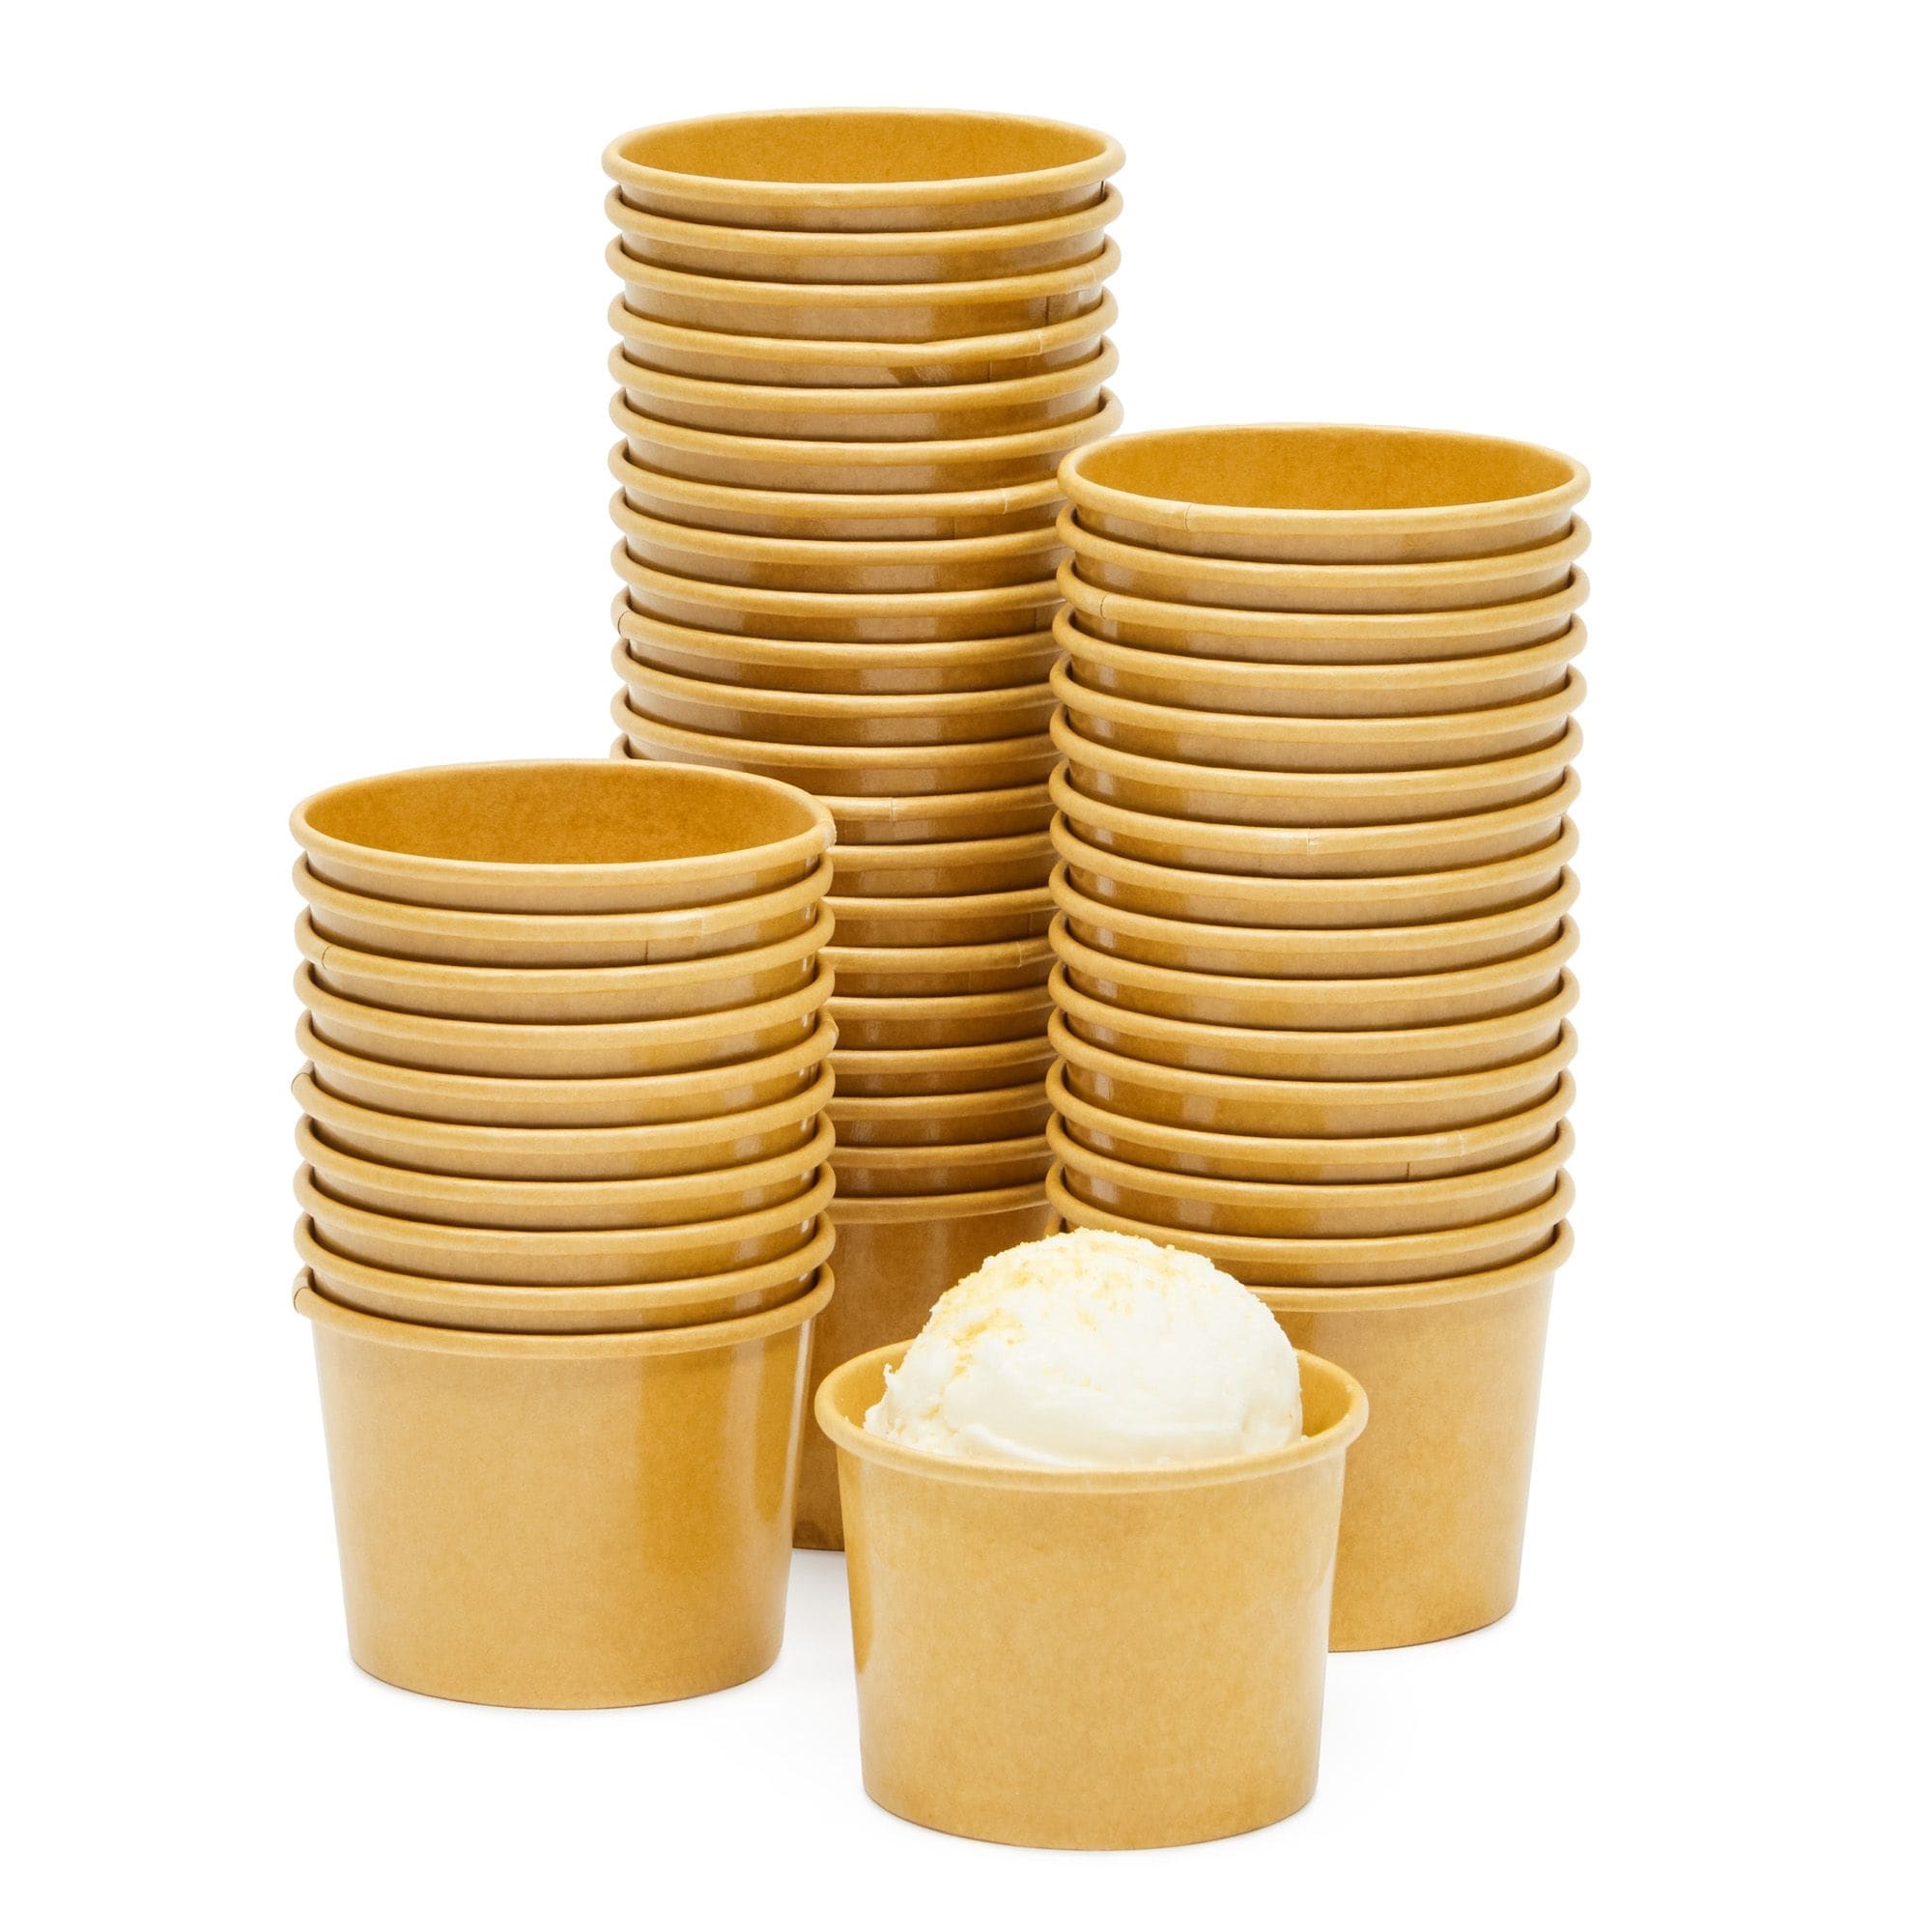 https://ak1.ostkcdn.com/images/products/is/images/direct/1cc66d1f9a99aec306f7c6a25b7fdec17e0706e9/5-oz-Kraft-Paper-Ice-Cream-Cups-%2850-Pack%29-for-Party%2C-Snacks%2C-Wedding%2C-Birthdays.jpg